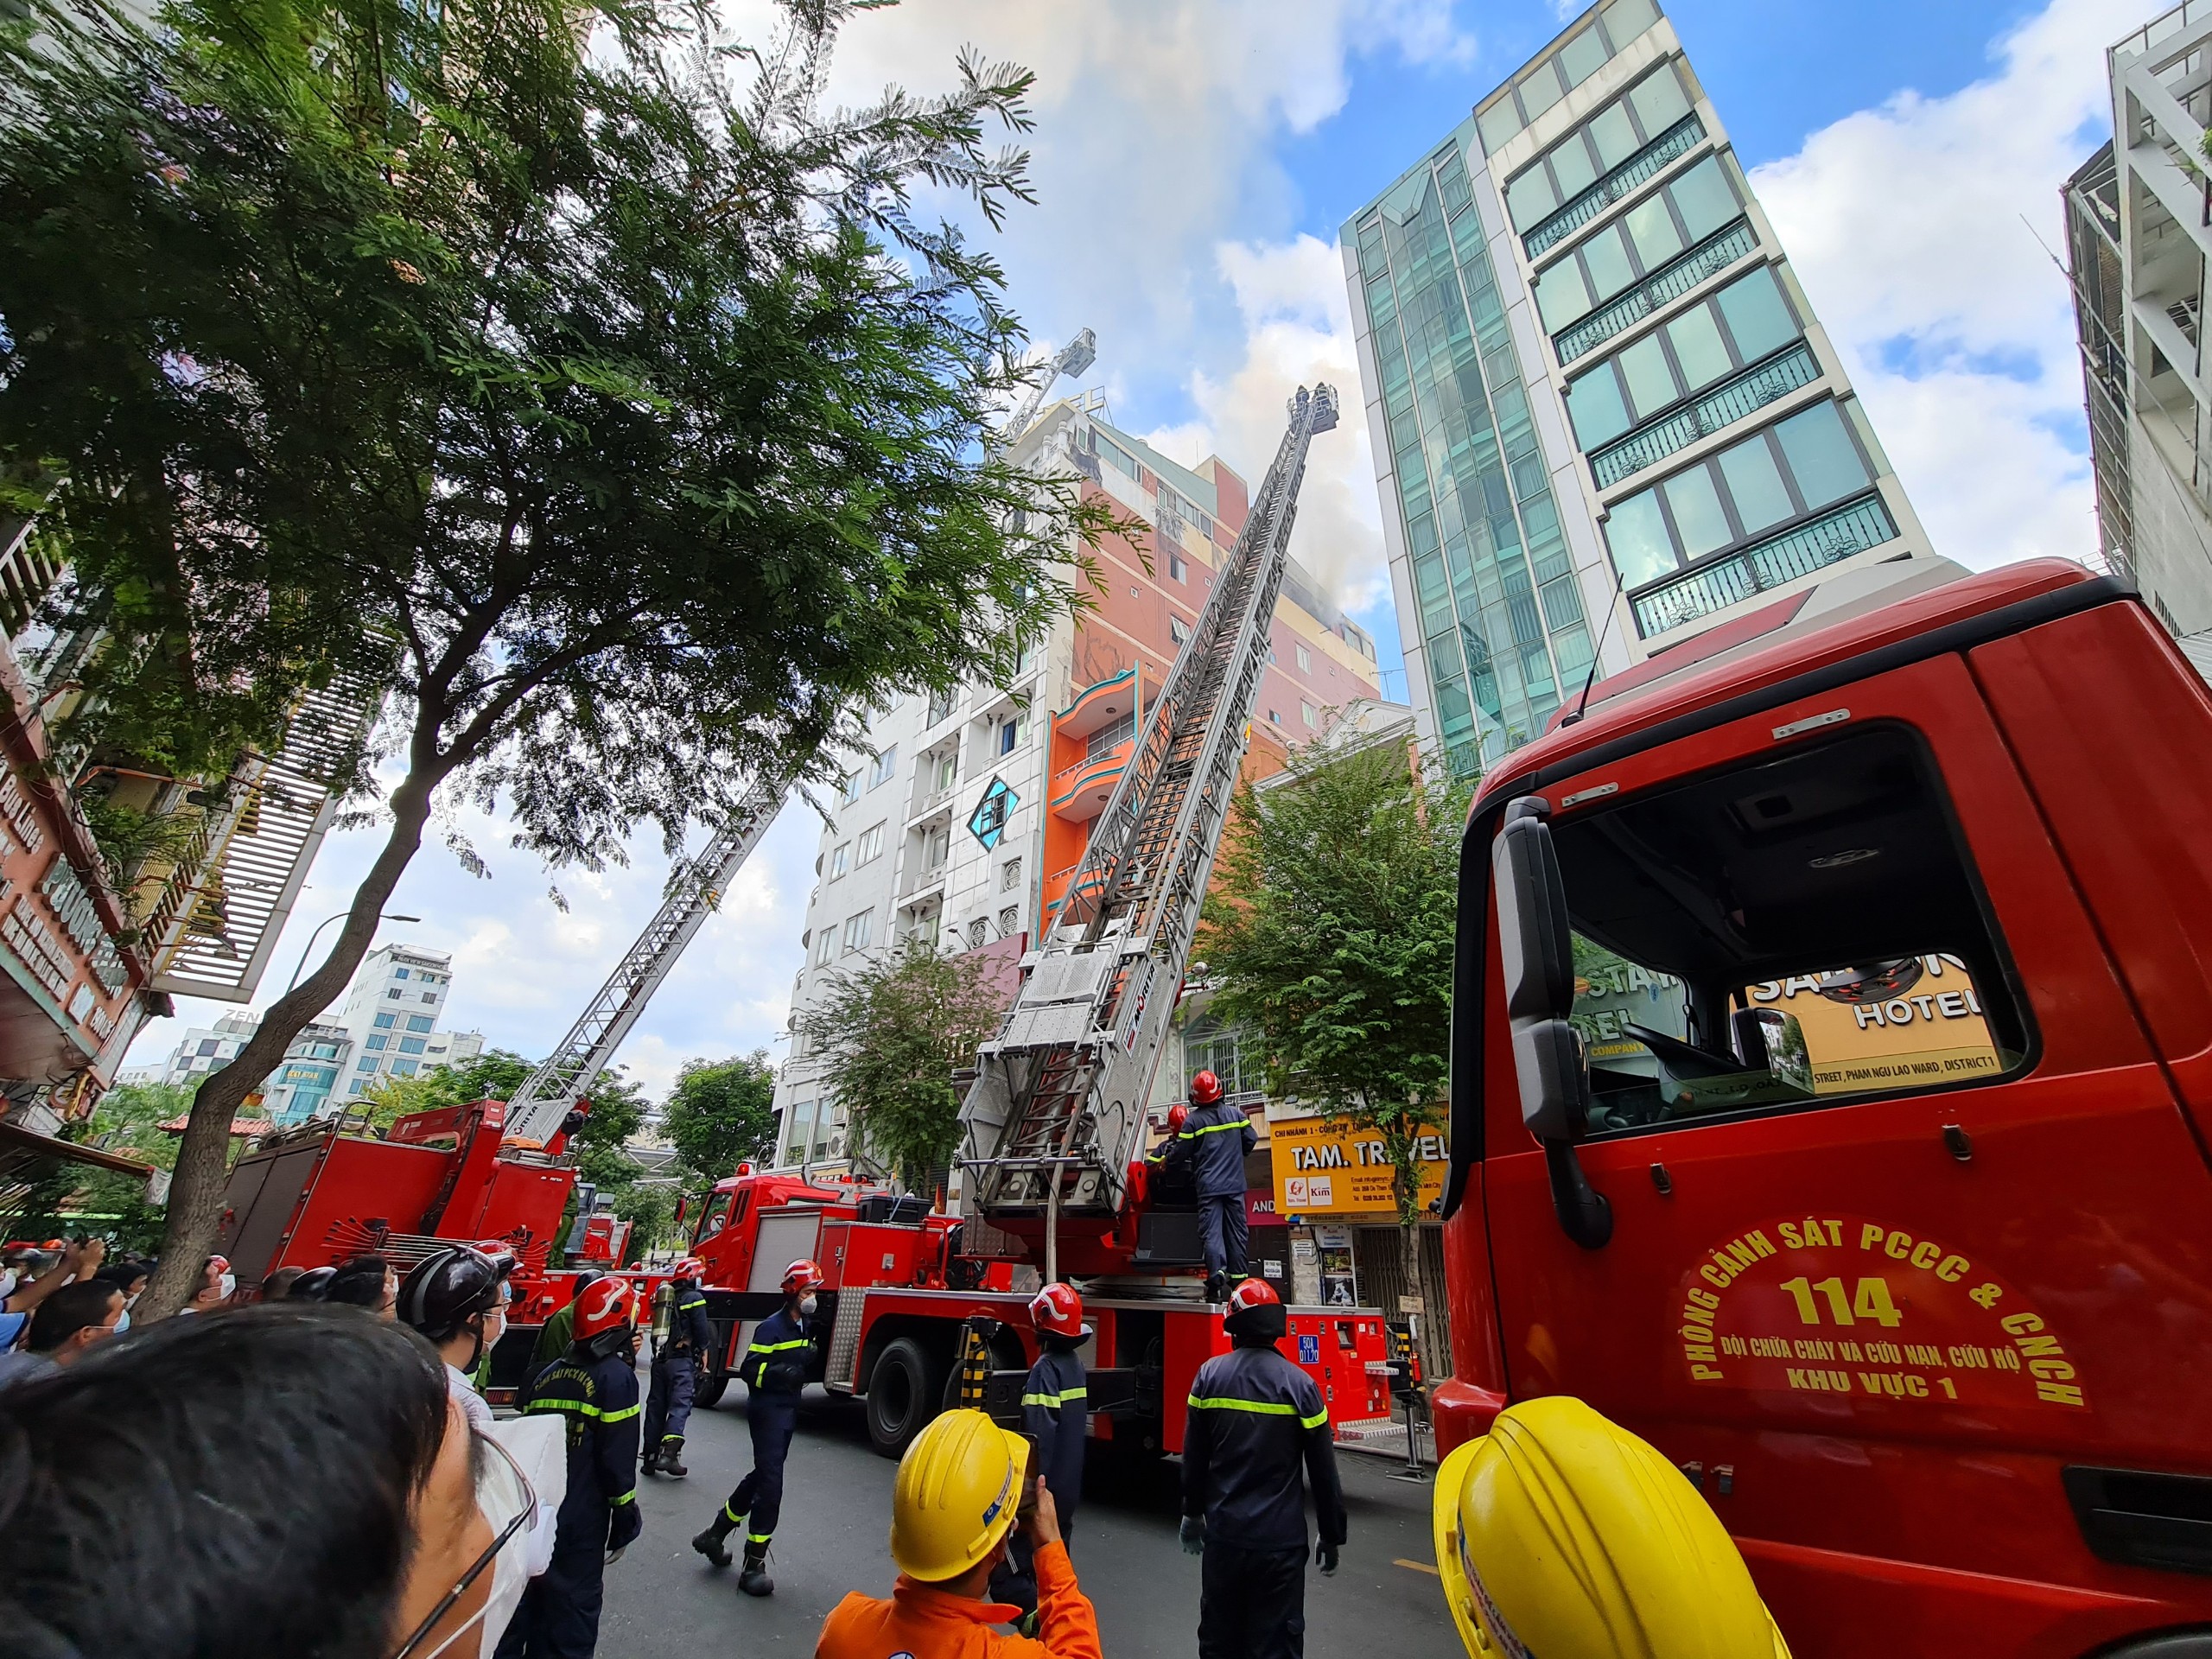 Firefighters use ladder trucks to spray water into a fire at a hotel on De Tham Street in District 1, Ho Chi Minh City, February 28, 2022. Photo: Fire Prevention and Fighting and Rescue Police Division (PC07) under the Ho Chi Minh City Department of Public Security